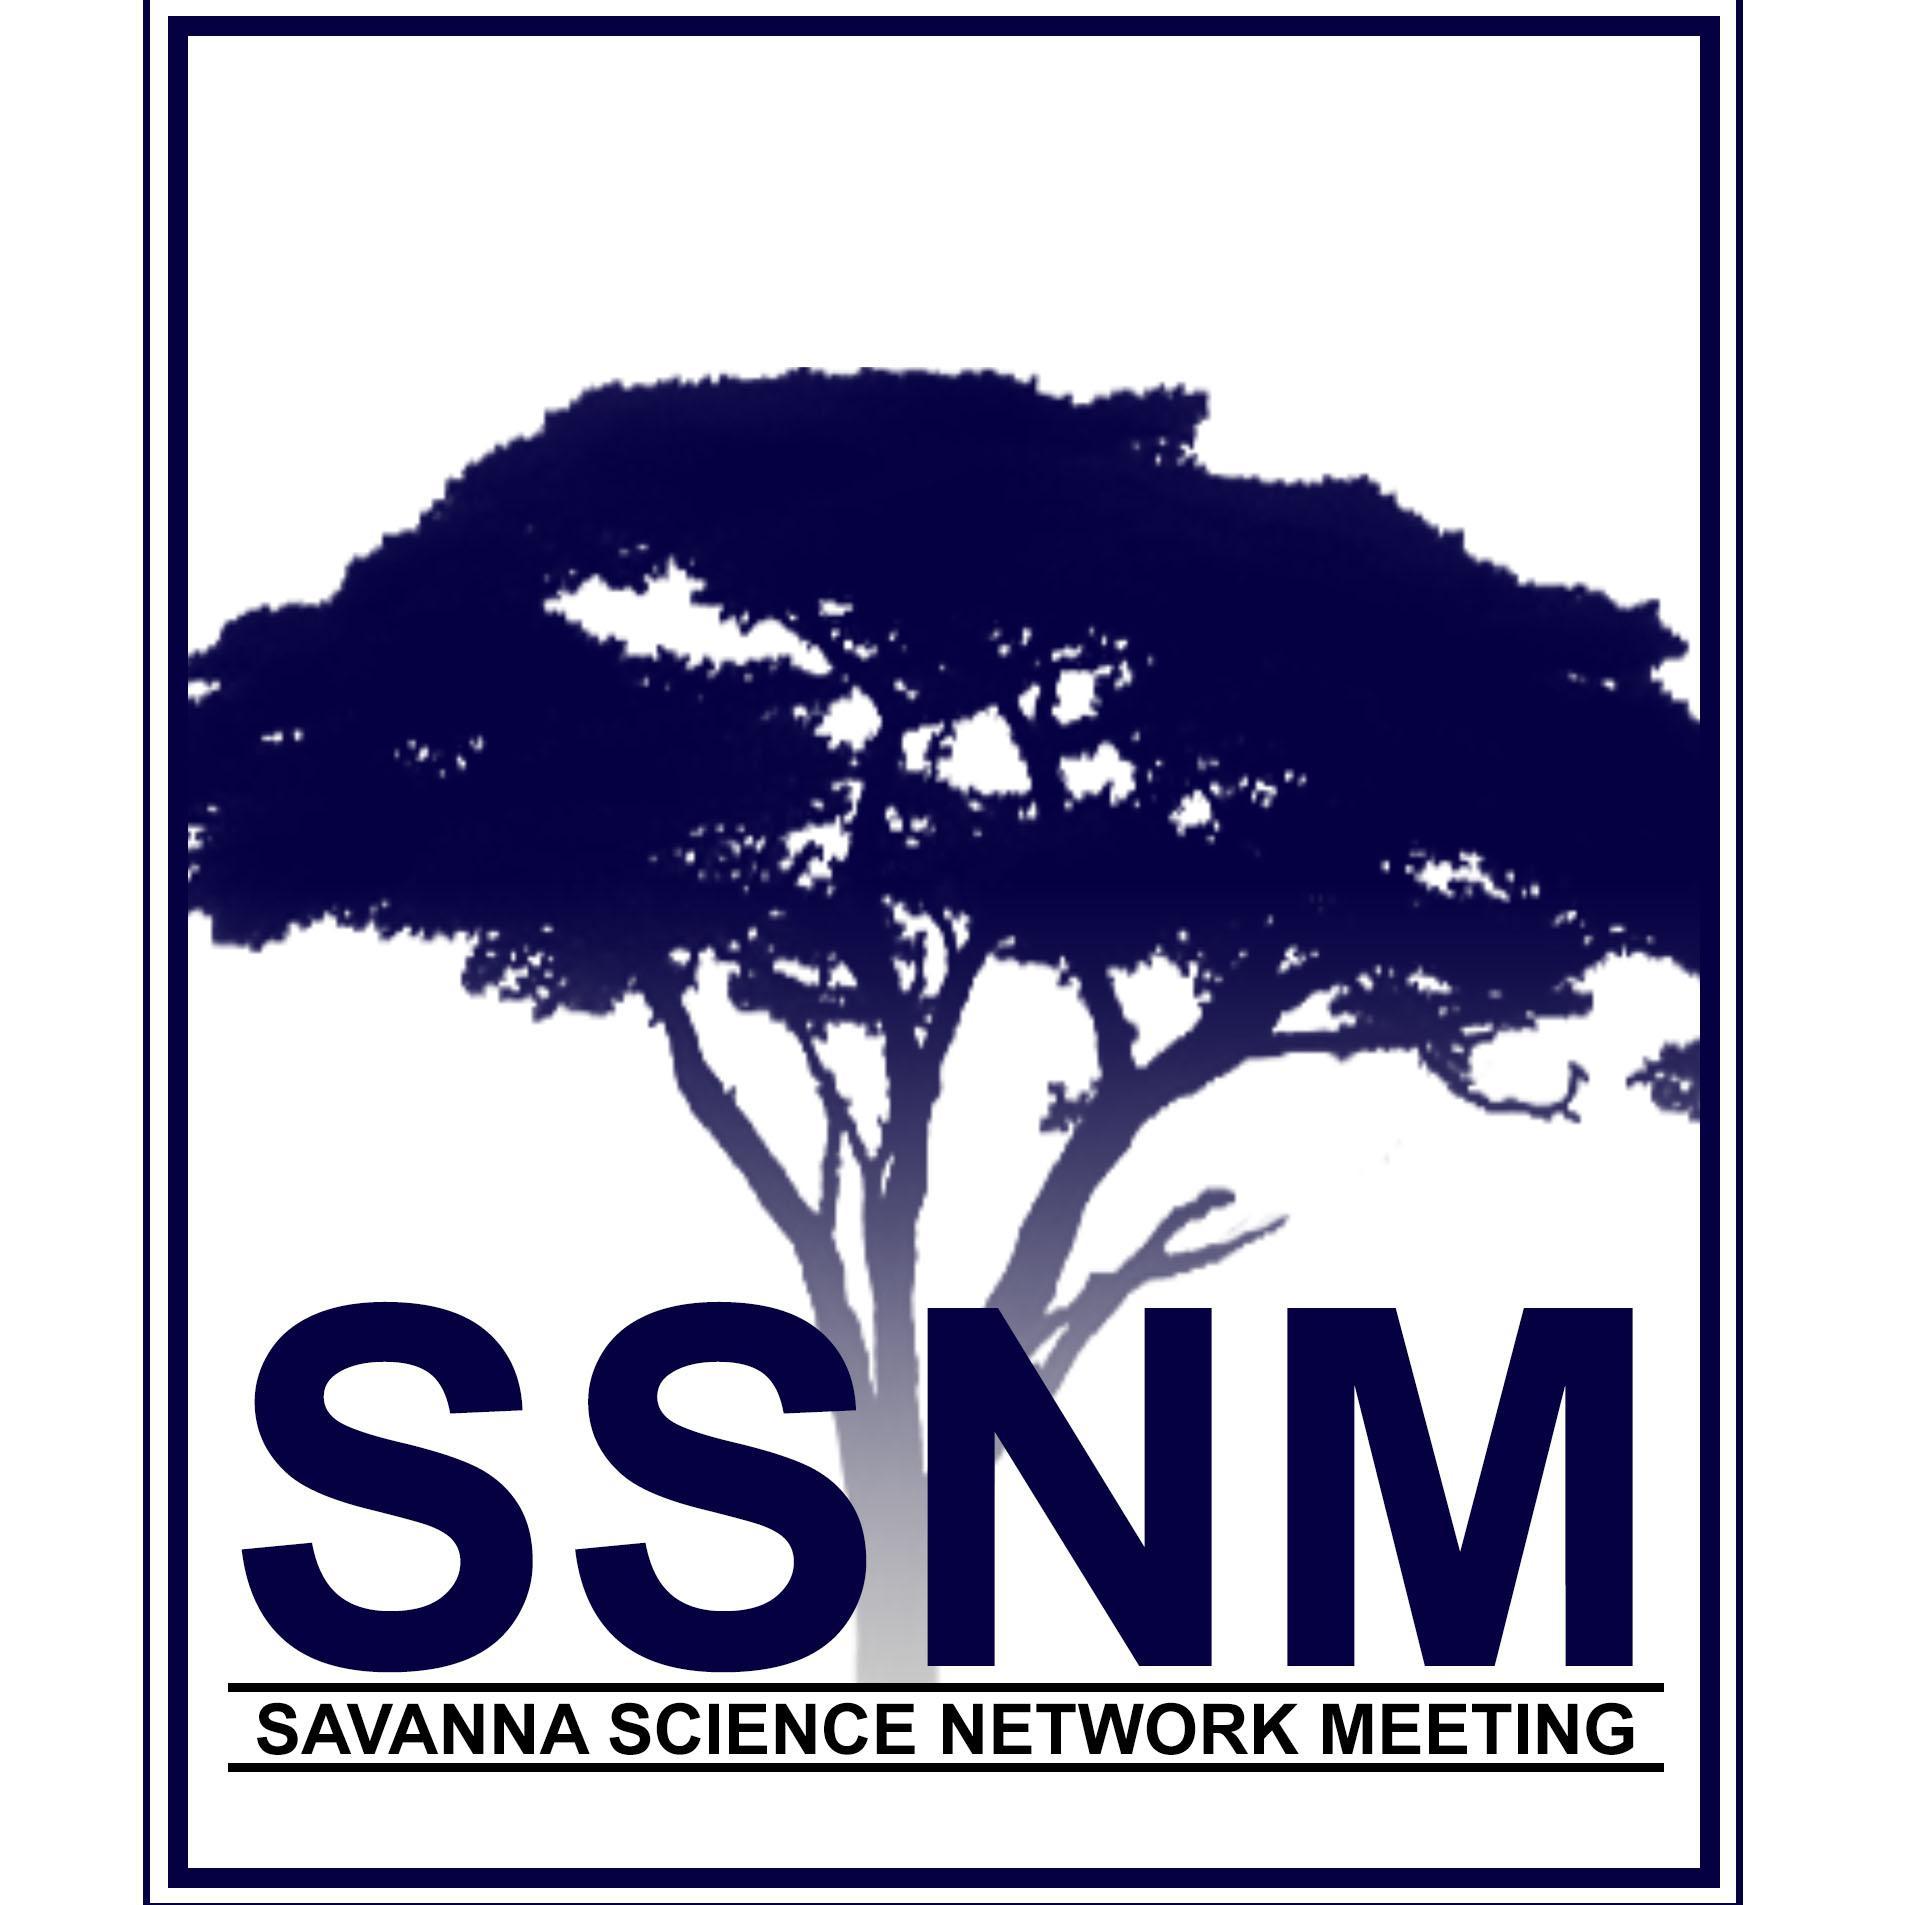 Savanna Science Network Meeting. Annual savanna research conference hosted by SANPArks Scientific Services